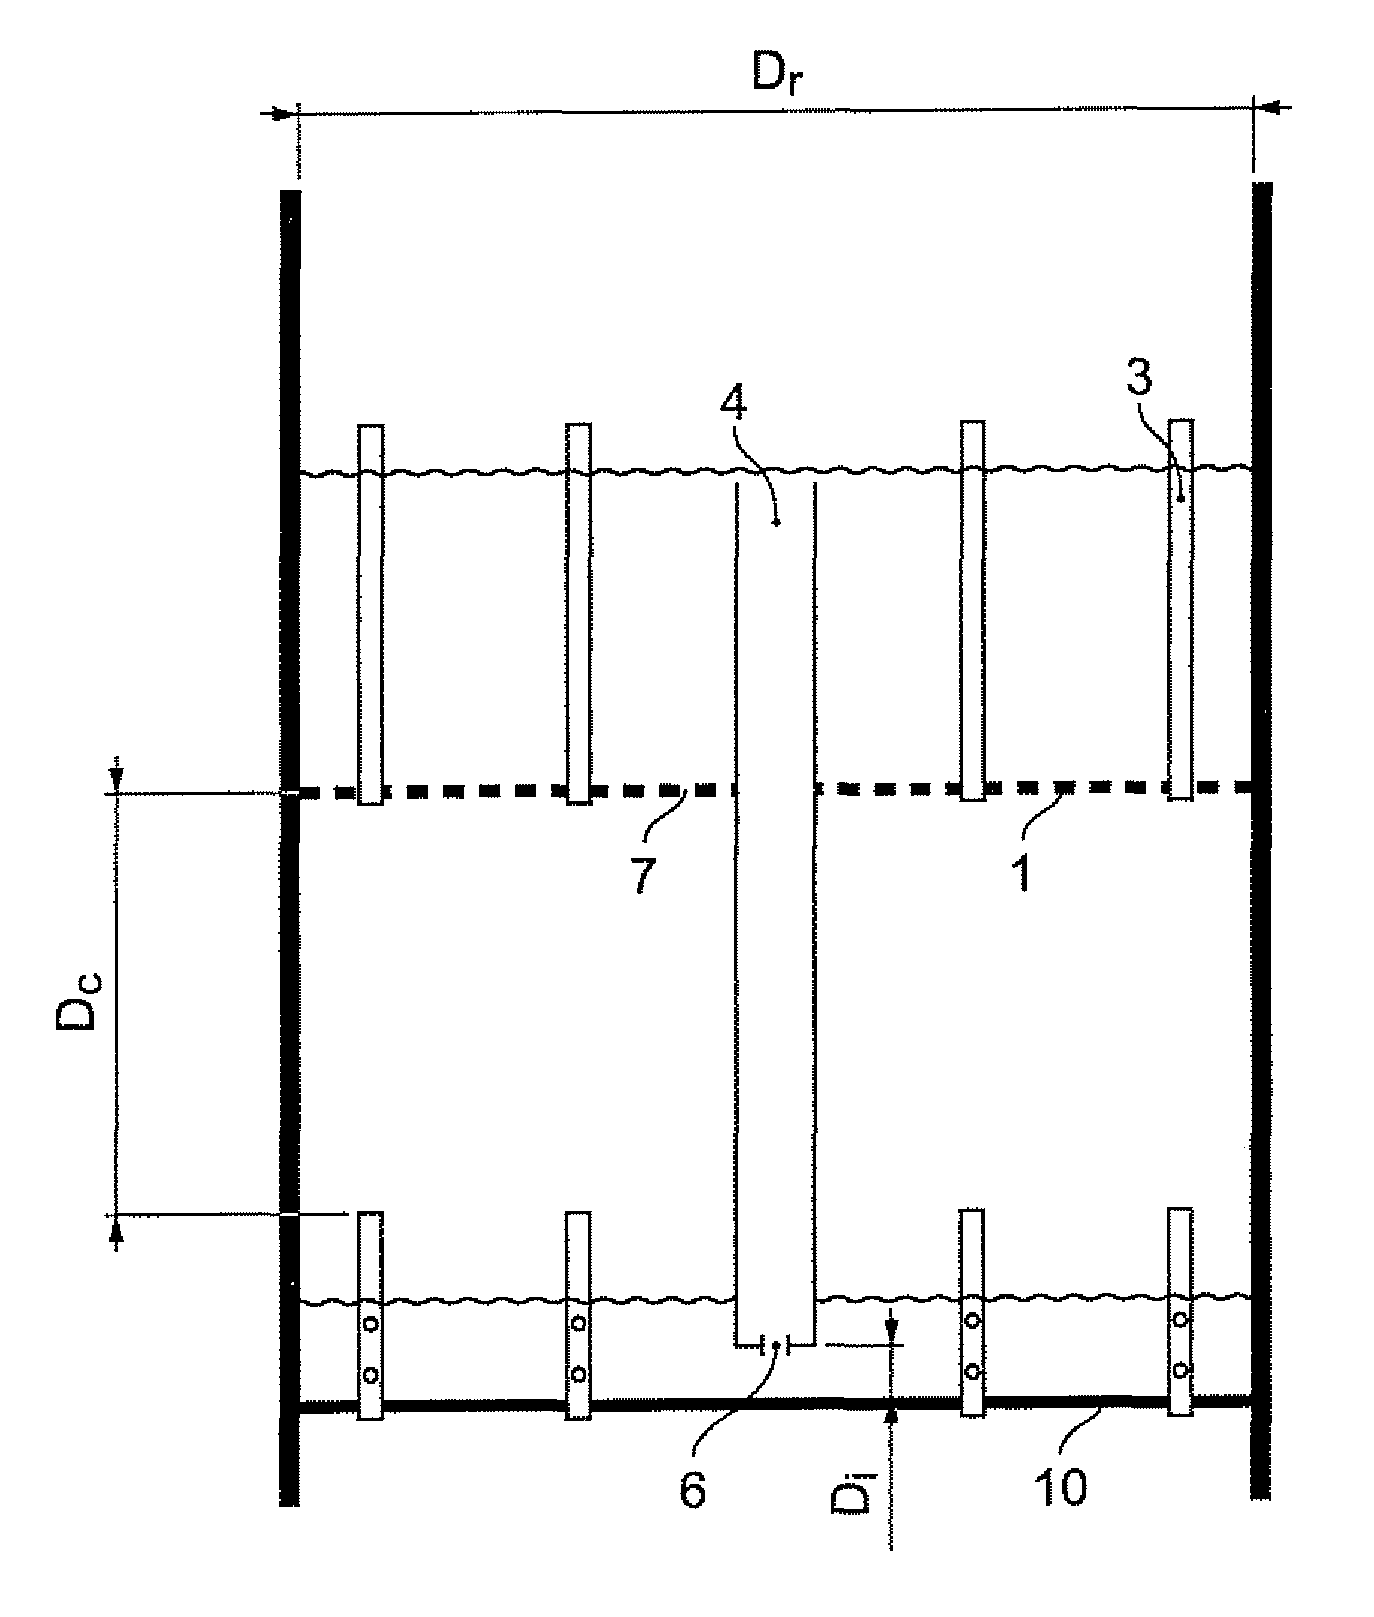 Process and apparatus for filtration and pre-distribution of gas and liquid phases in a down-flow catalytic reactor